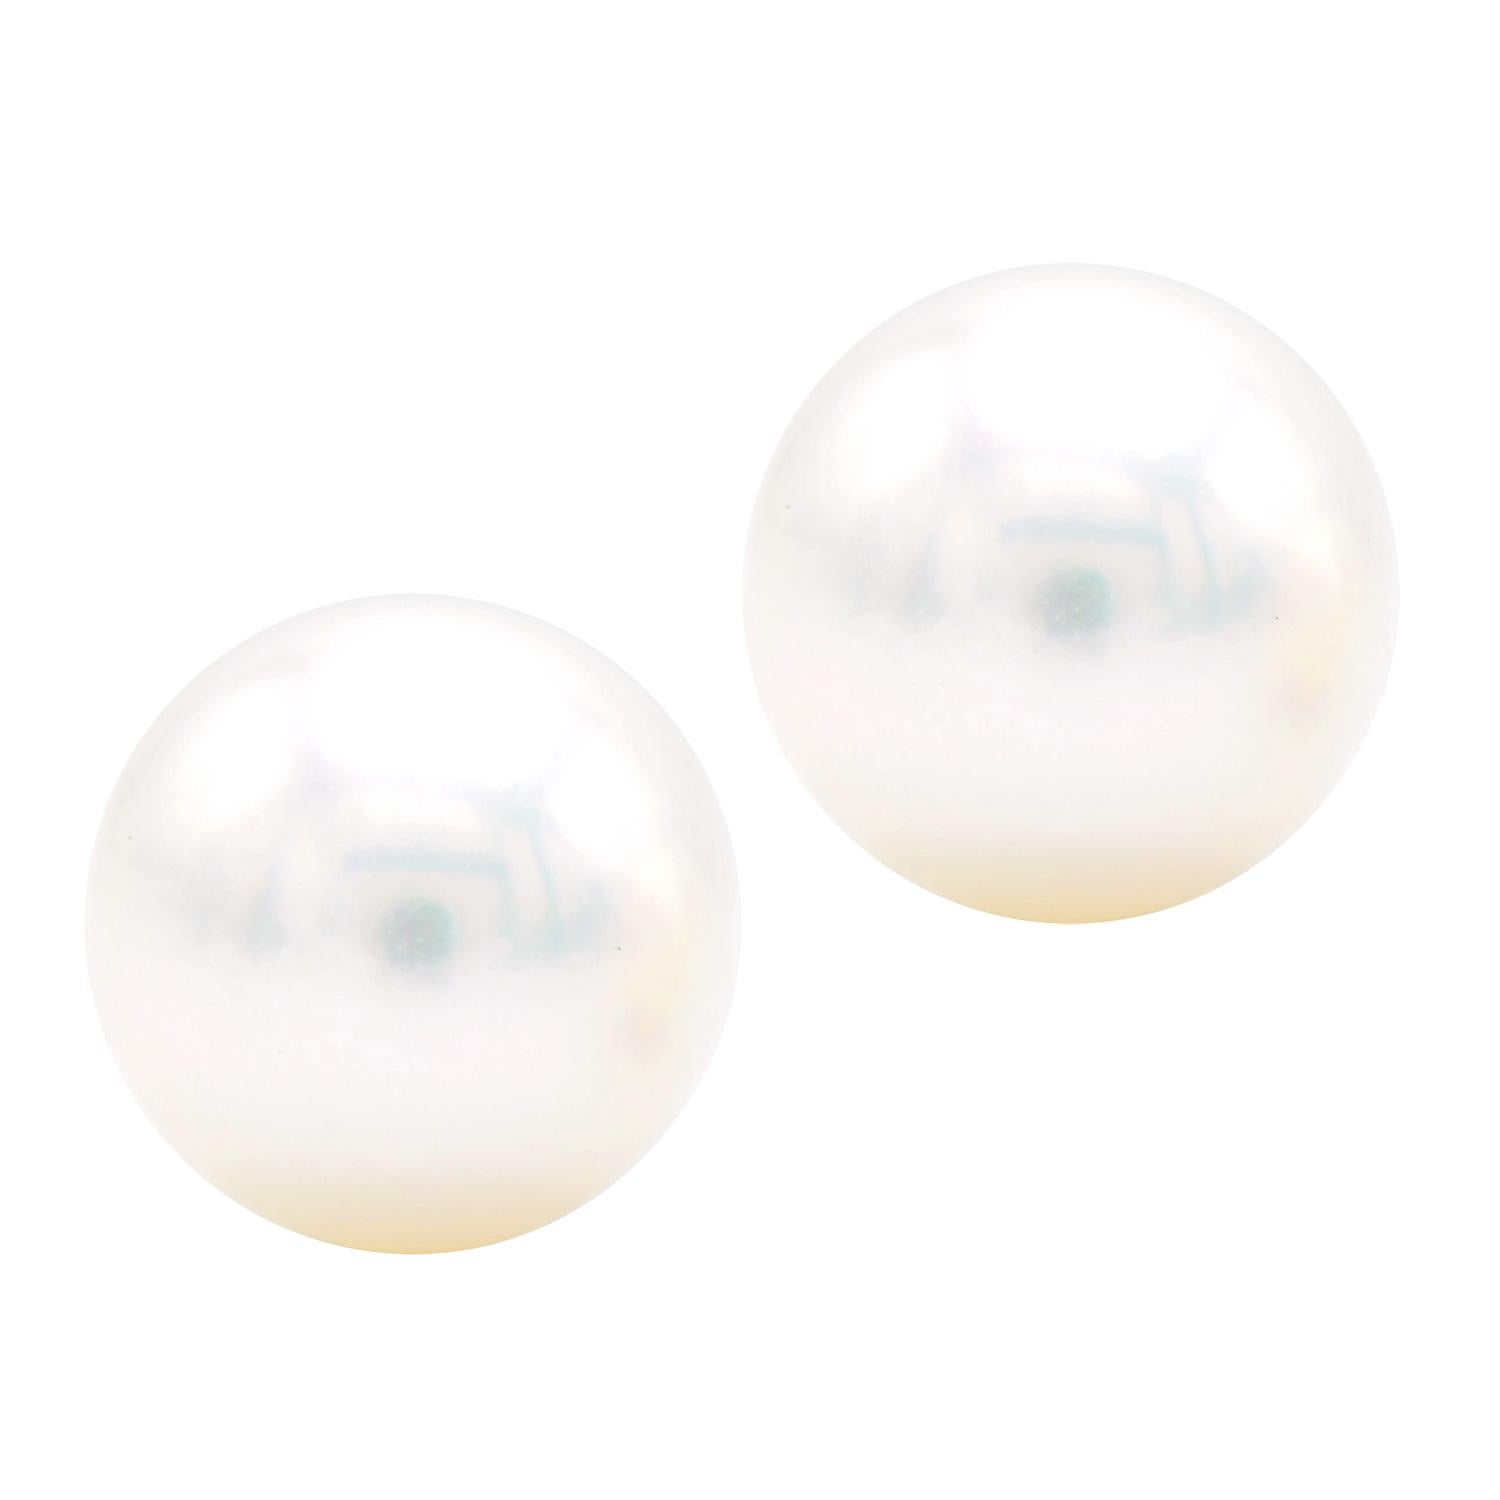 Cultured pearl stud earrings are the most classic and timeless piece of jewelry. They can be worn by anyone and everyone and make an excellent gift for all occasions. These 8.5-9mm cultured pearl earrings are perfectly matched and set in 14 karat